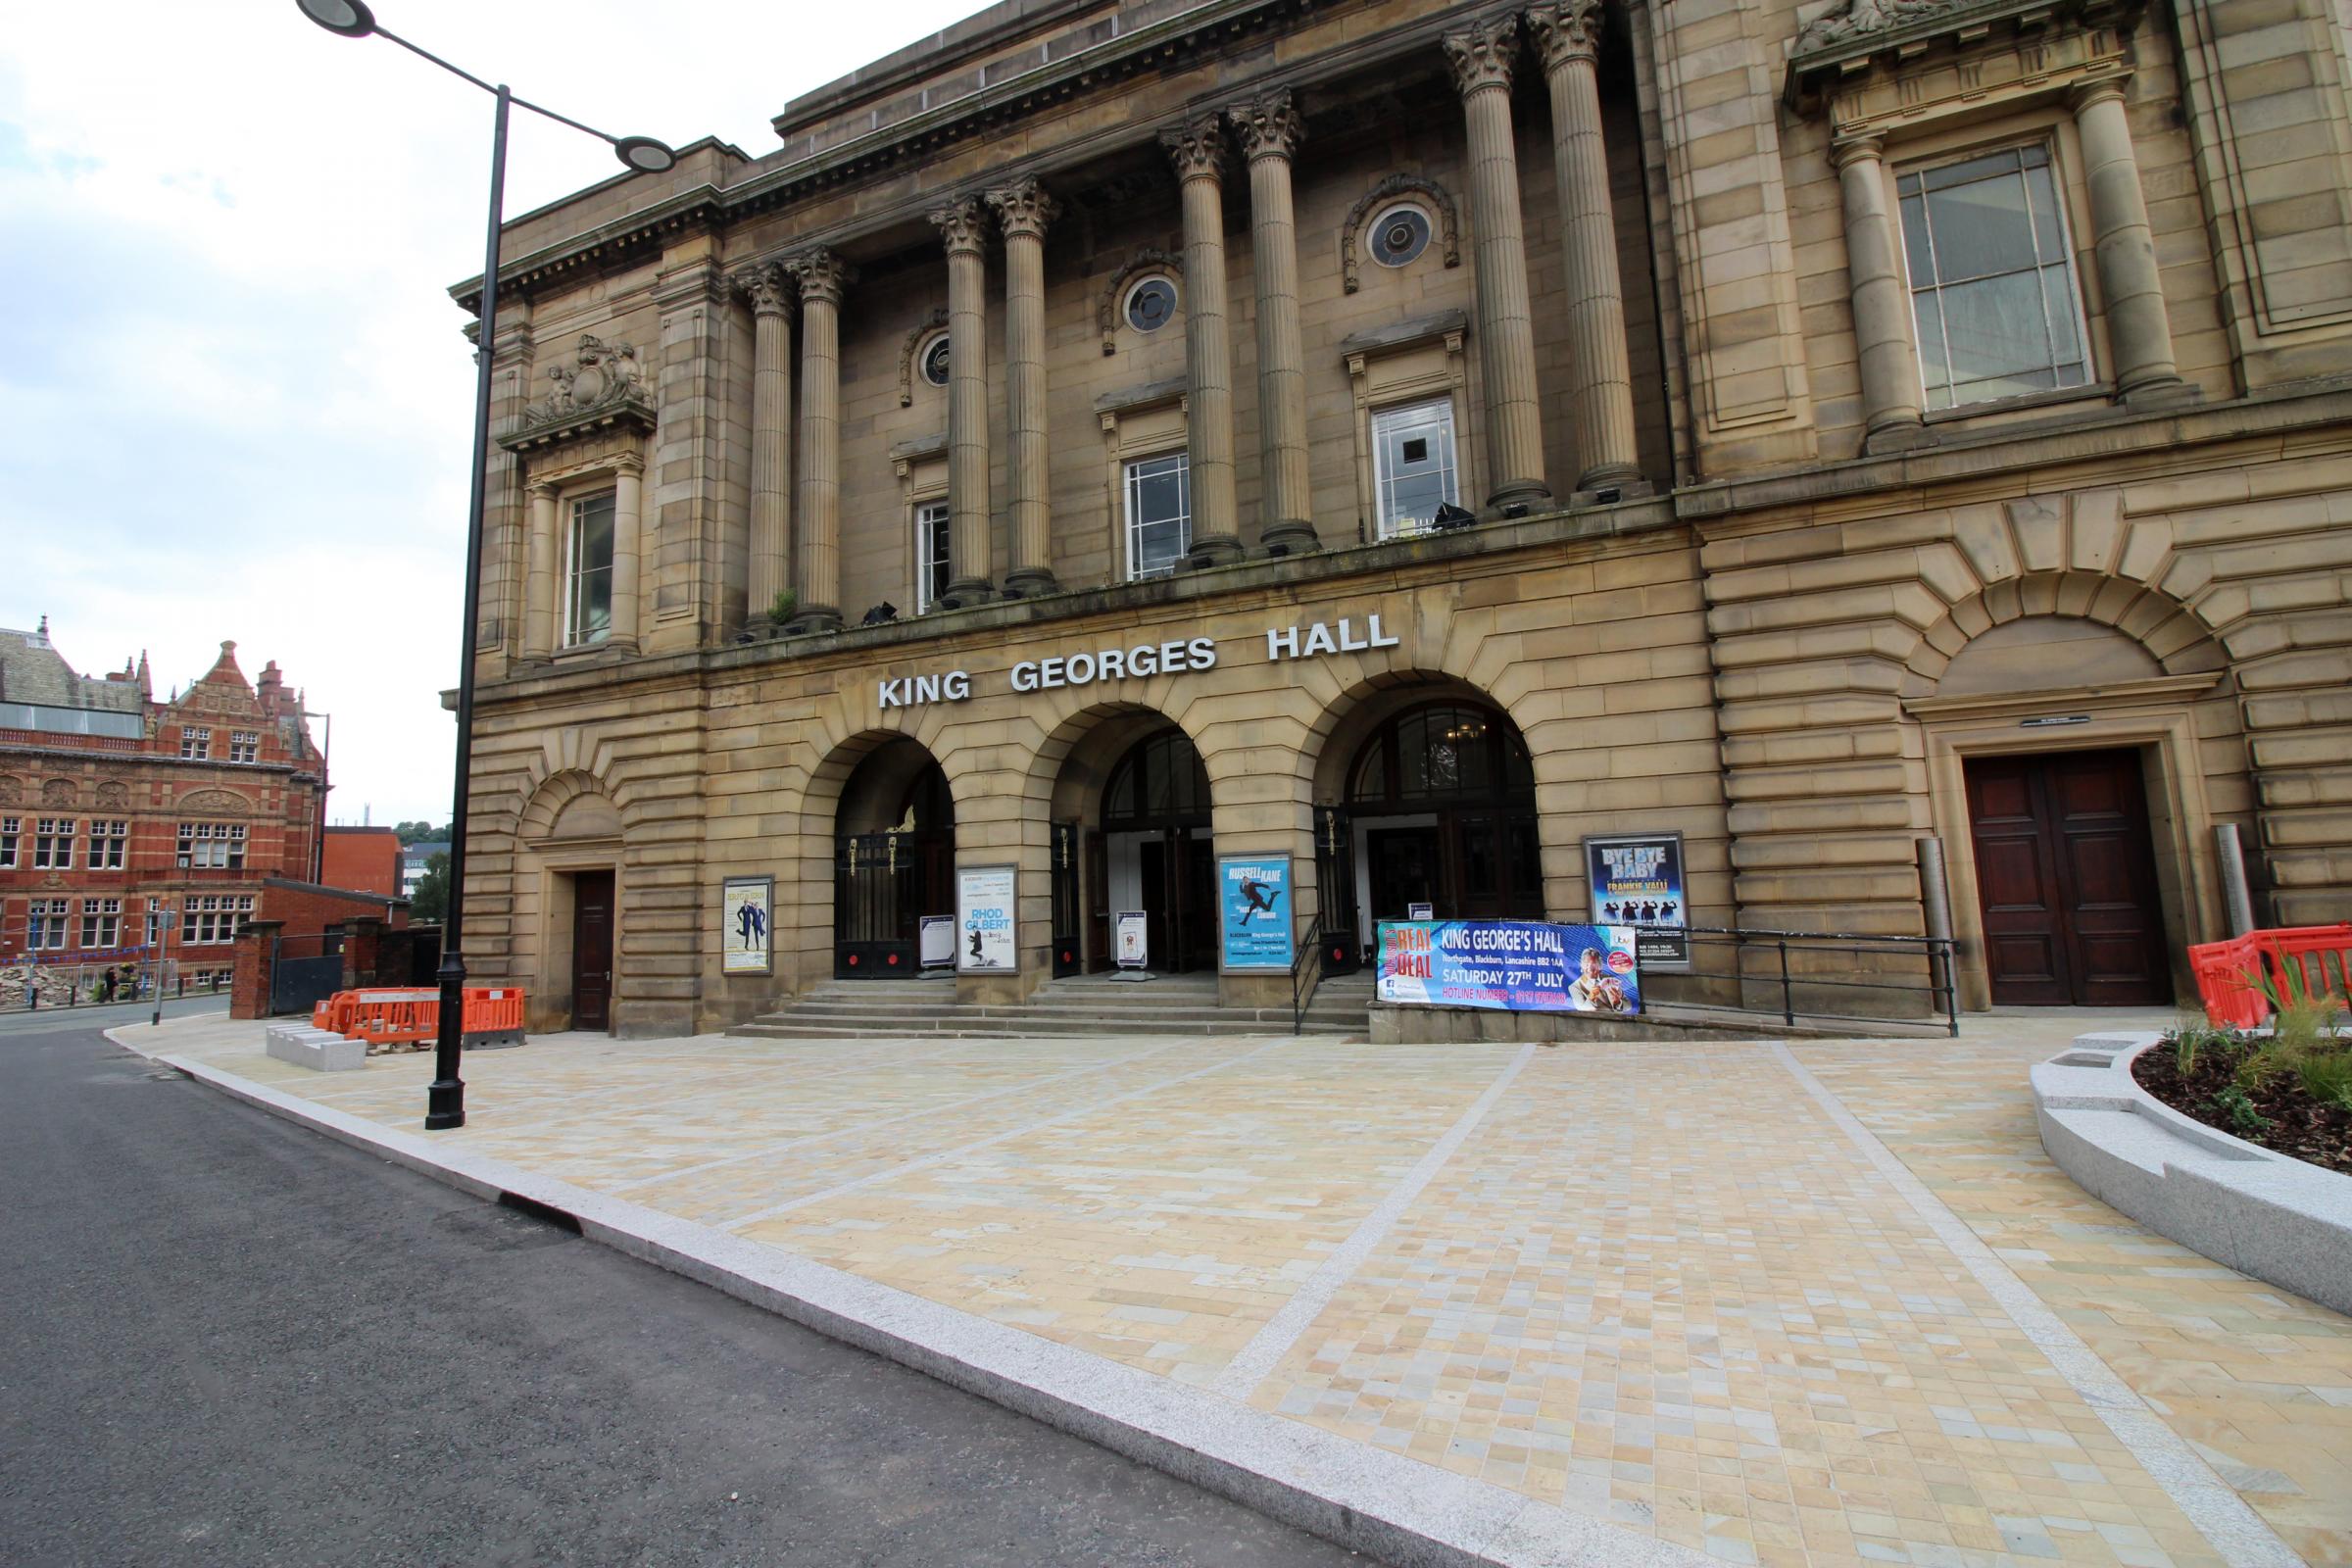  Pavement outside King George Hall